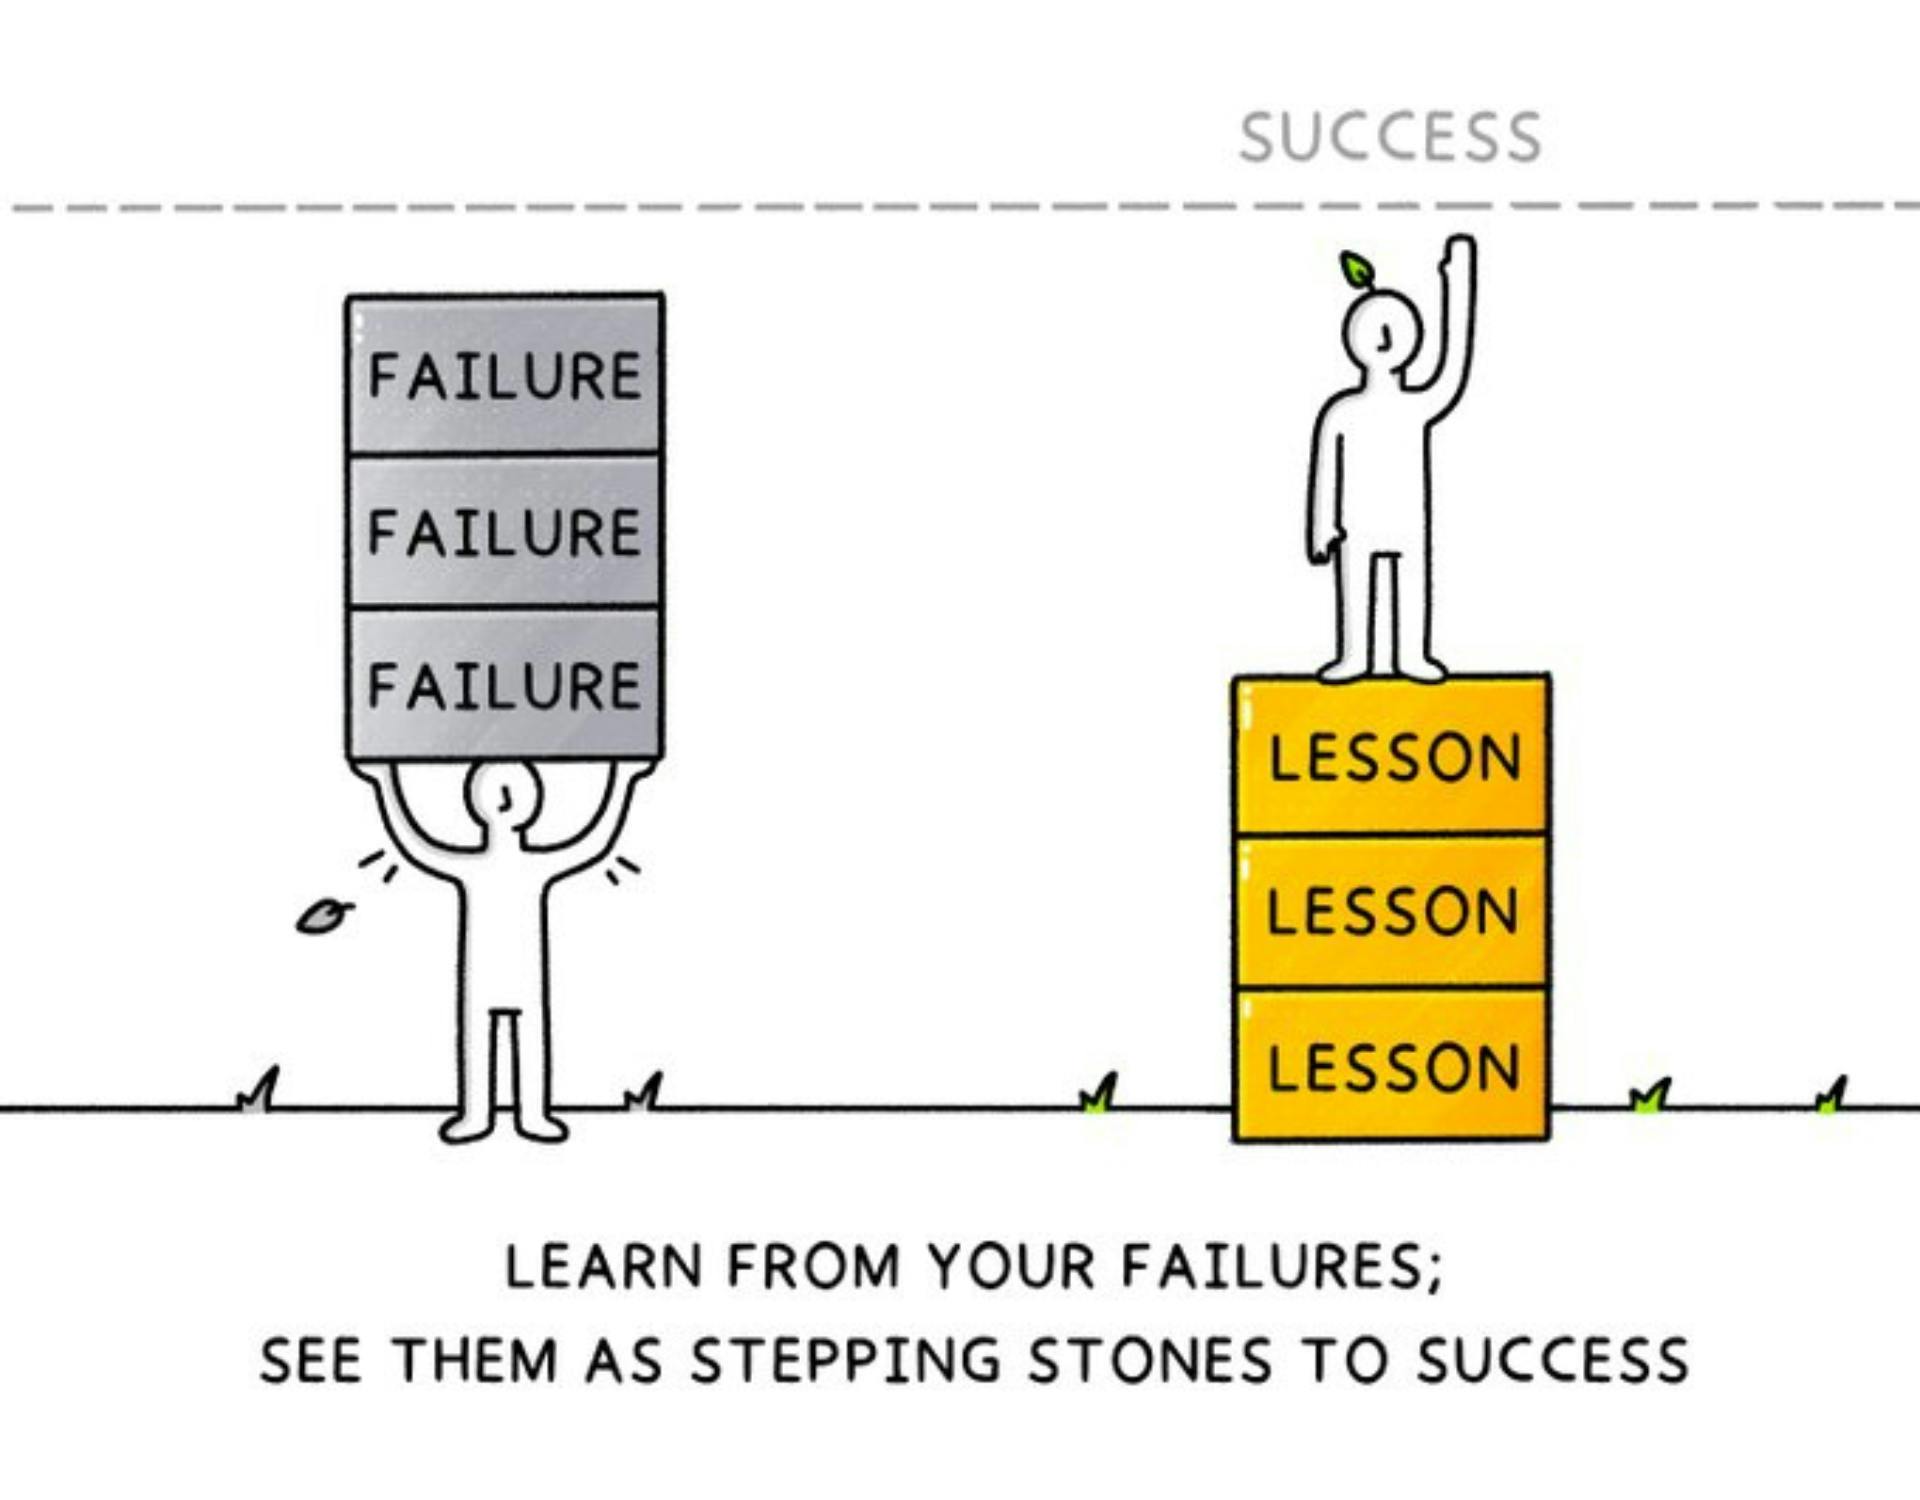 Learn from your failures, see them as stepping stones to success, with illustration